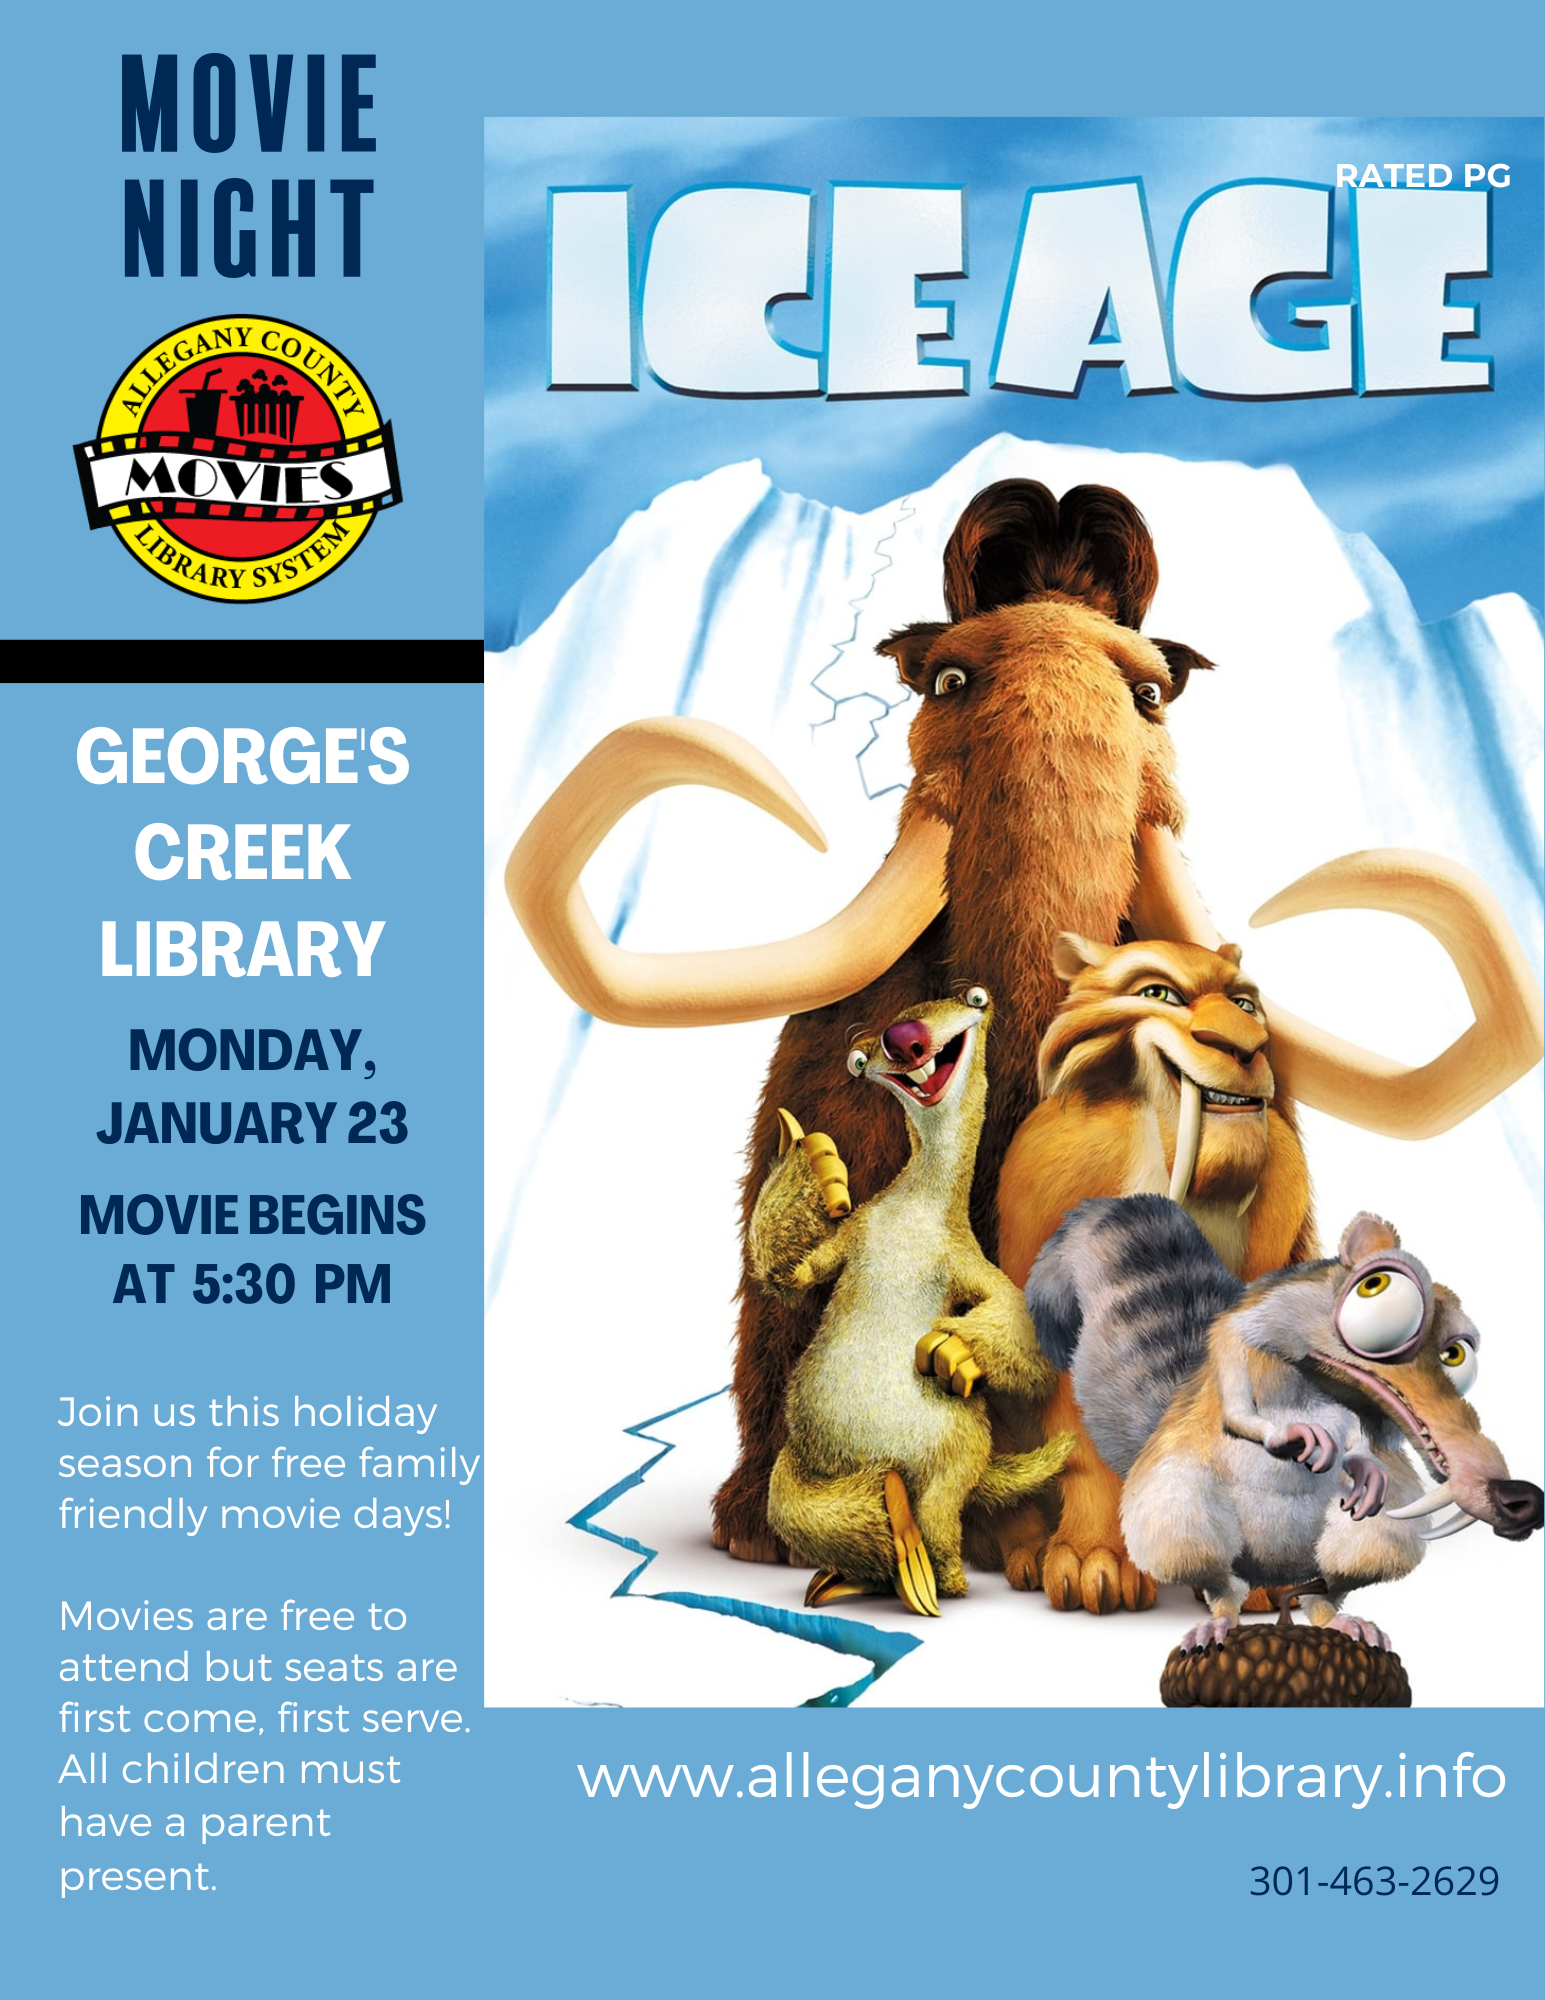 Movie poster and event details for Ice Age